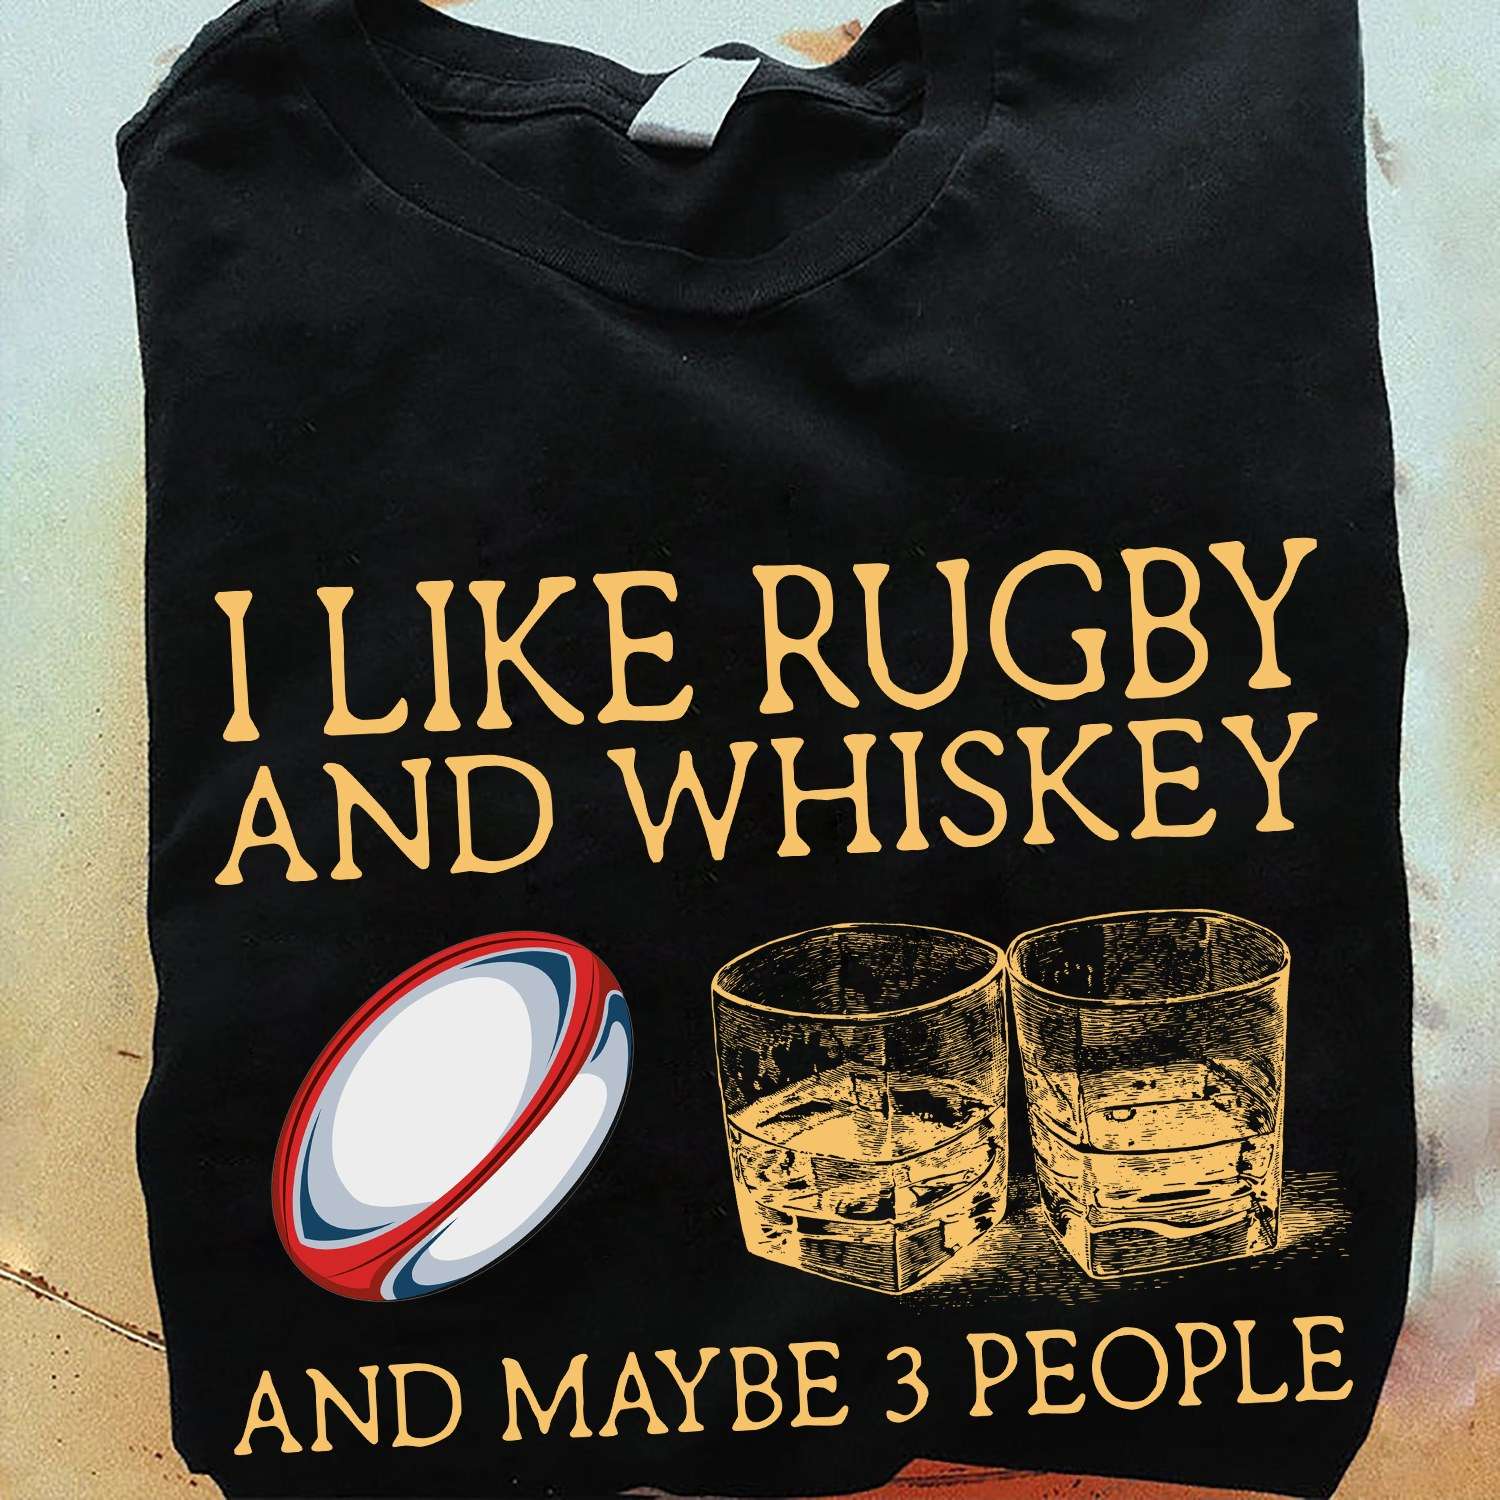 Rugby Whiskey - I like rugby and whiskey and maybe 3 people